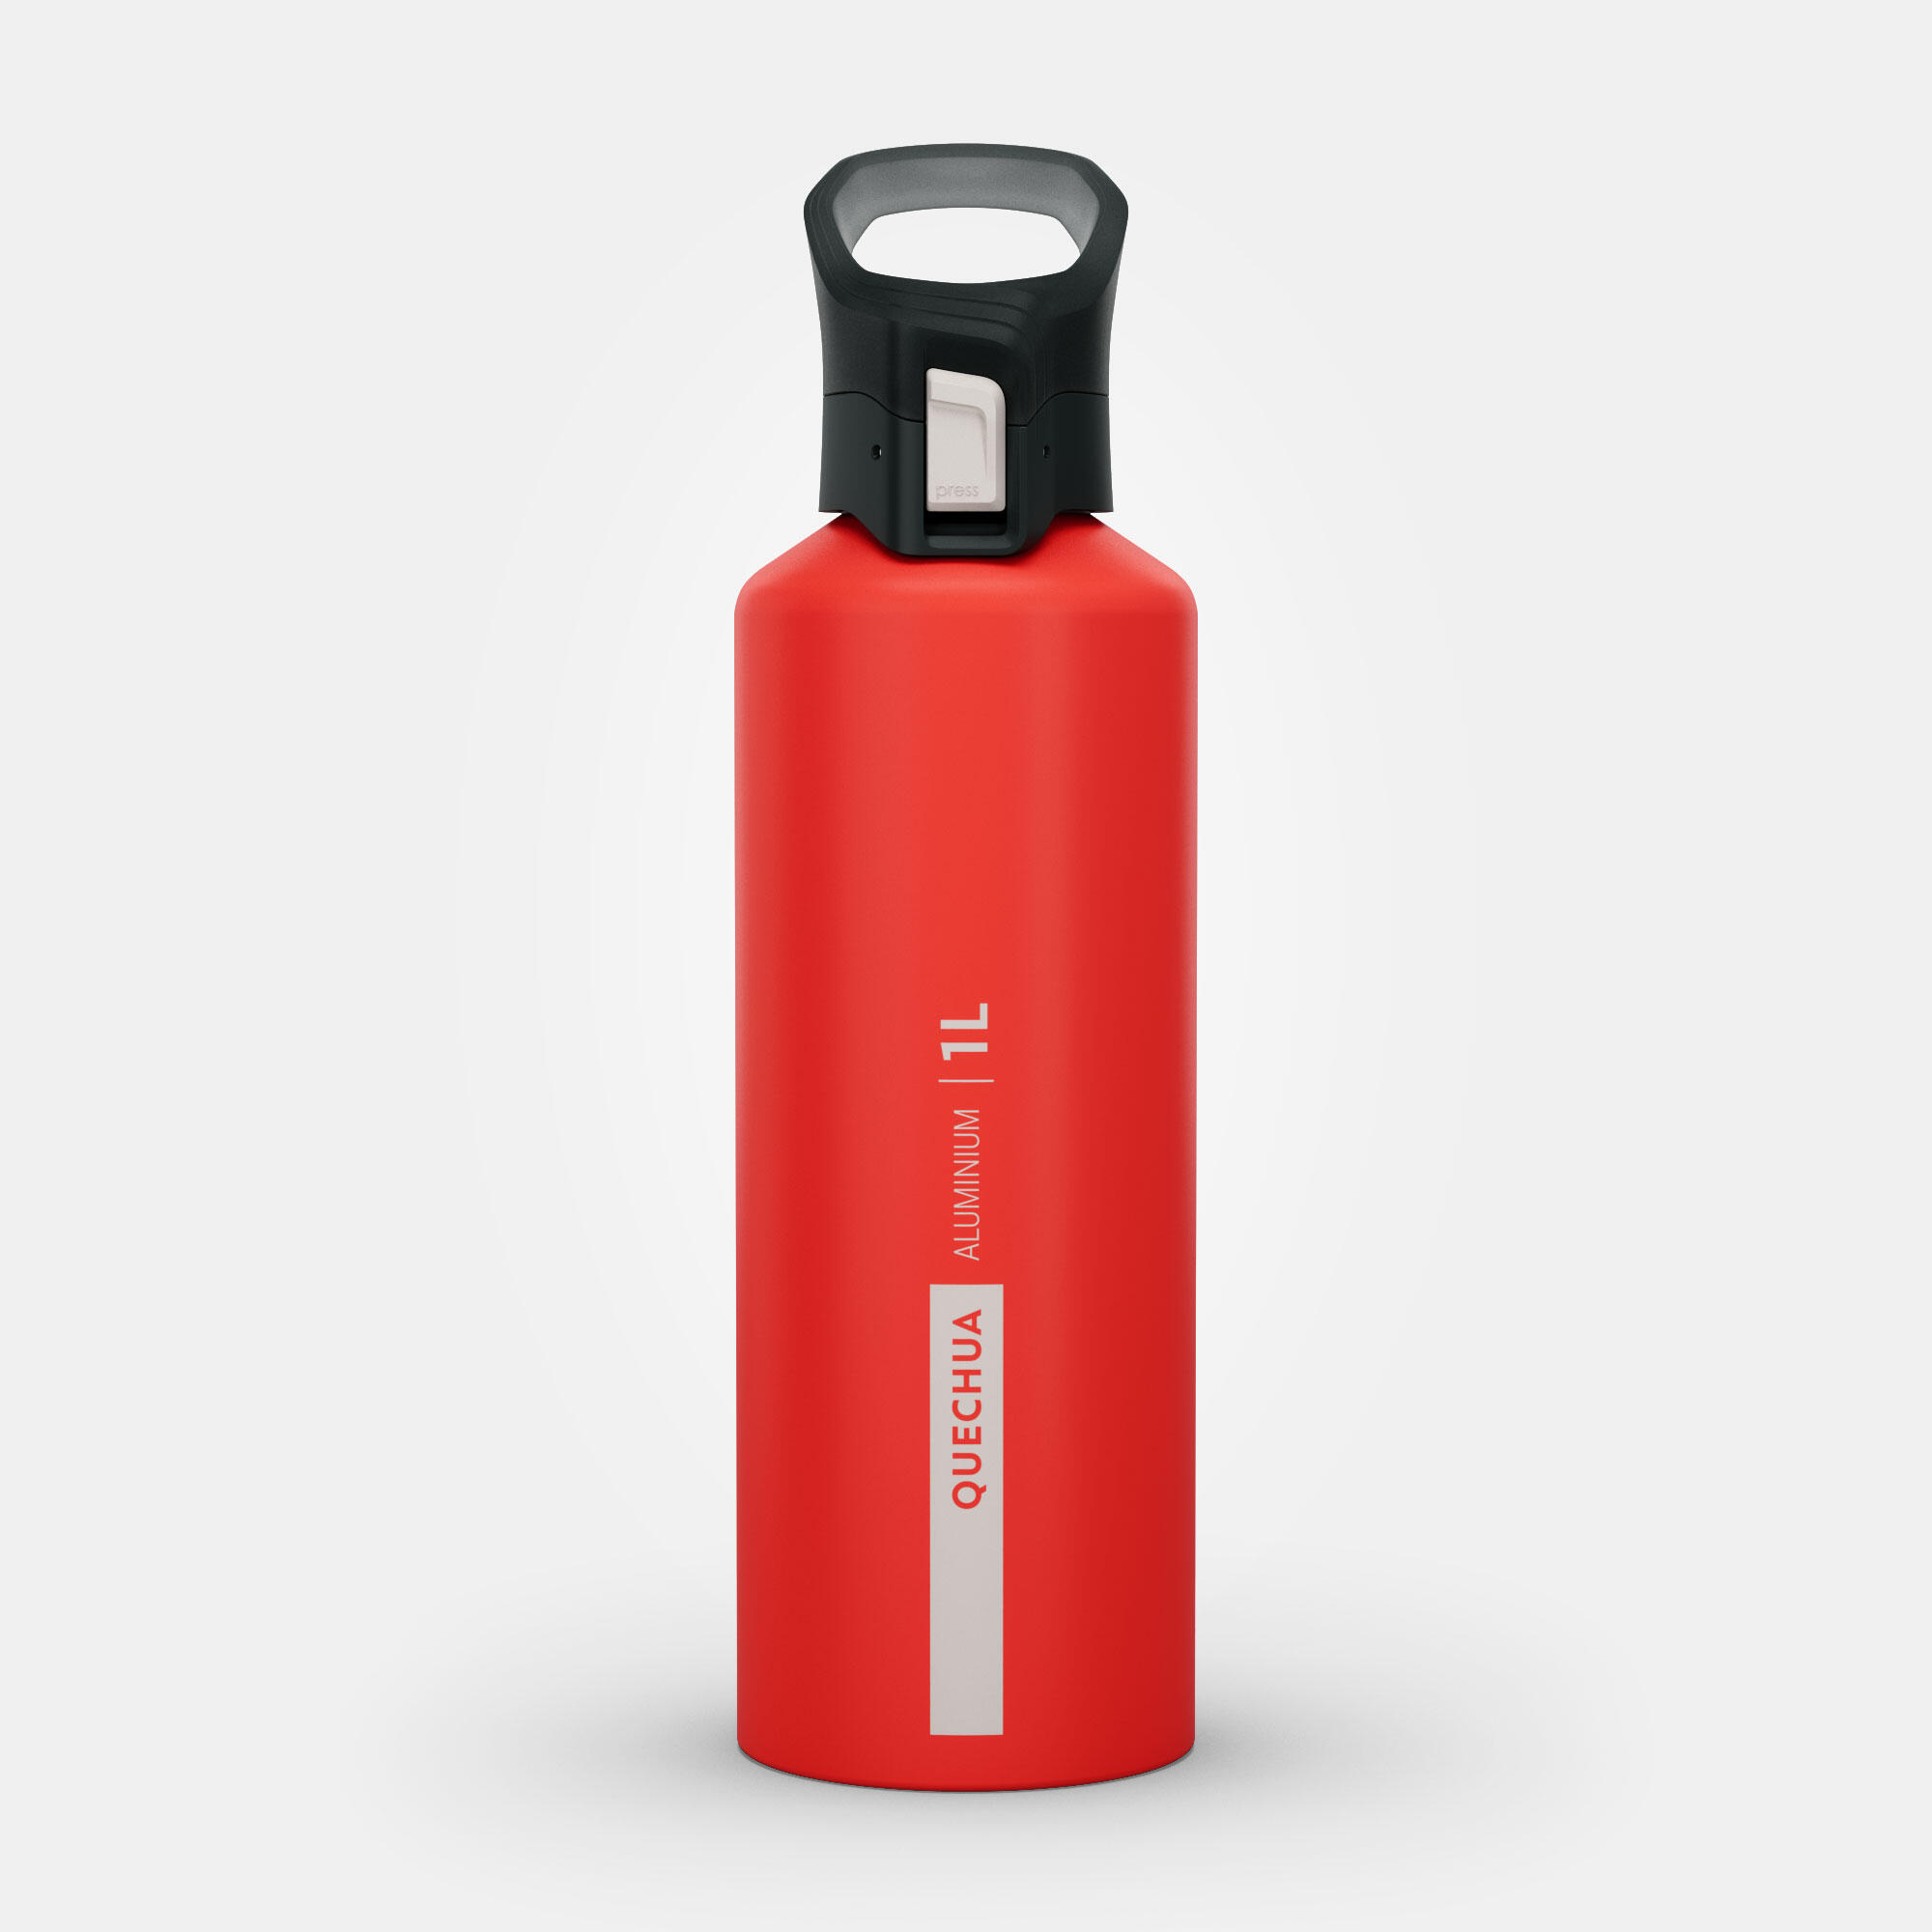 1 L aluminium water bottle with quick opening cap for hiking - Red 11/11